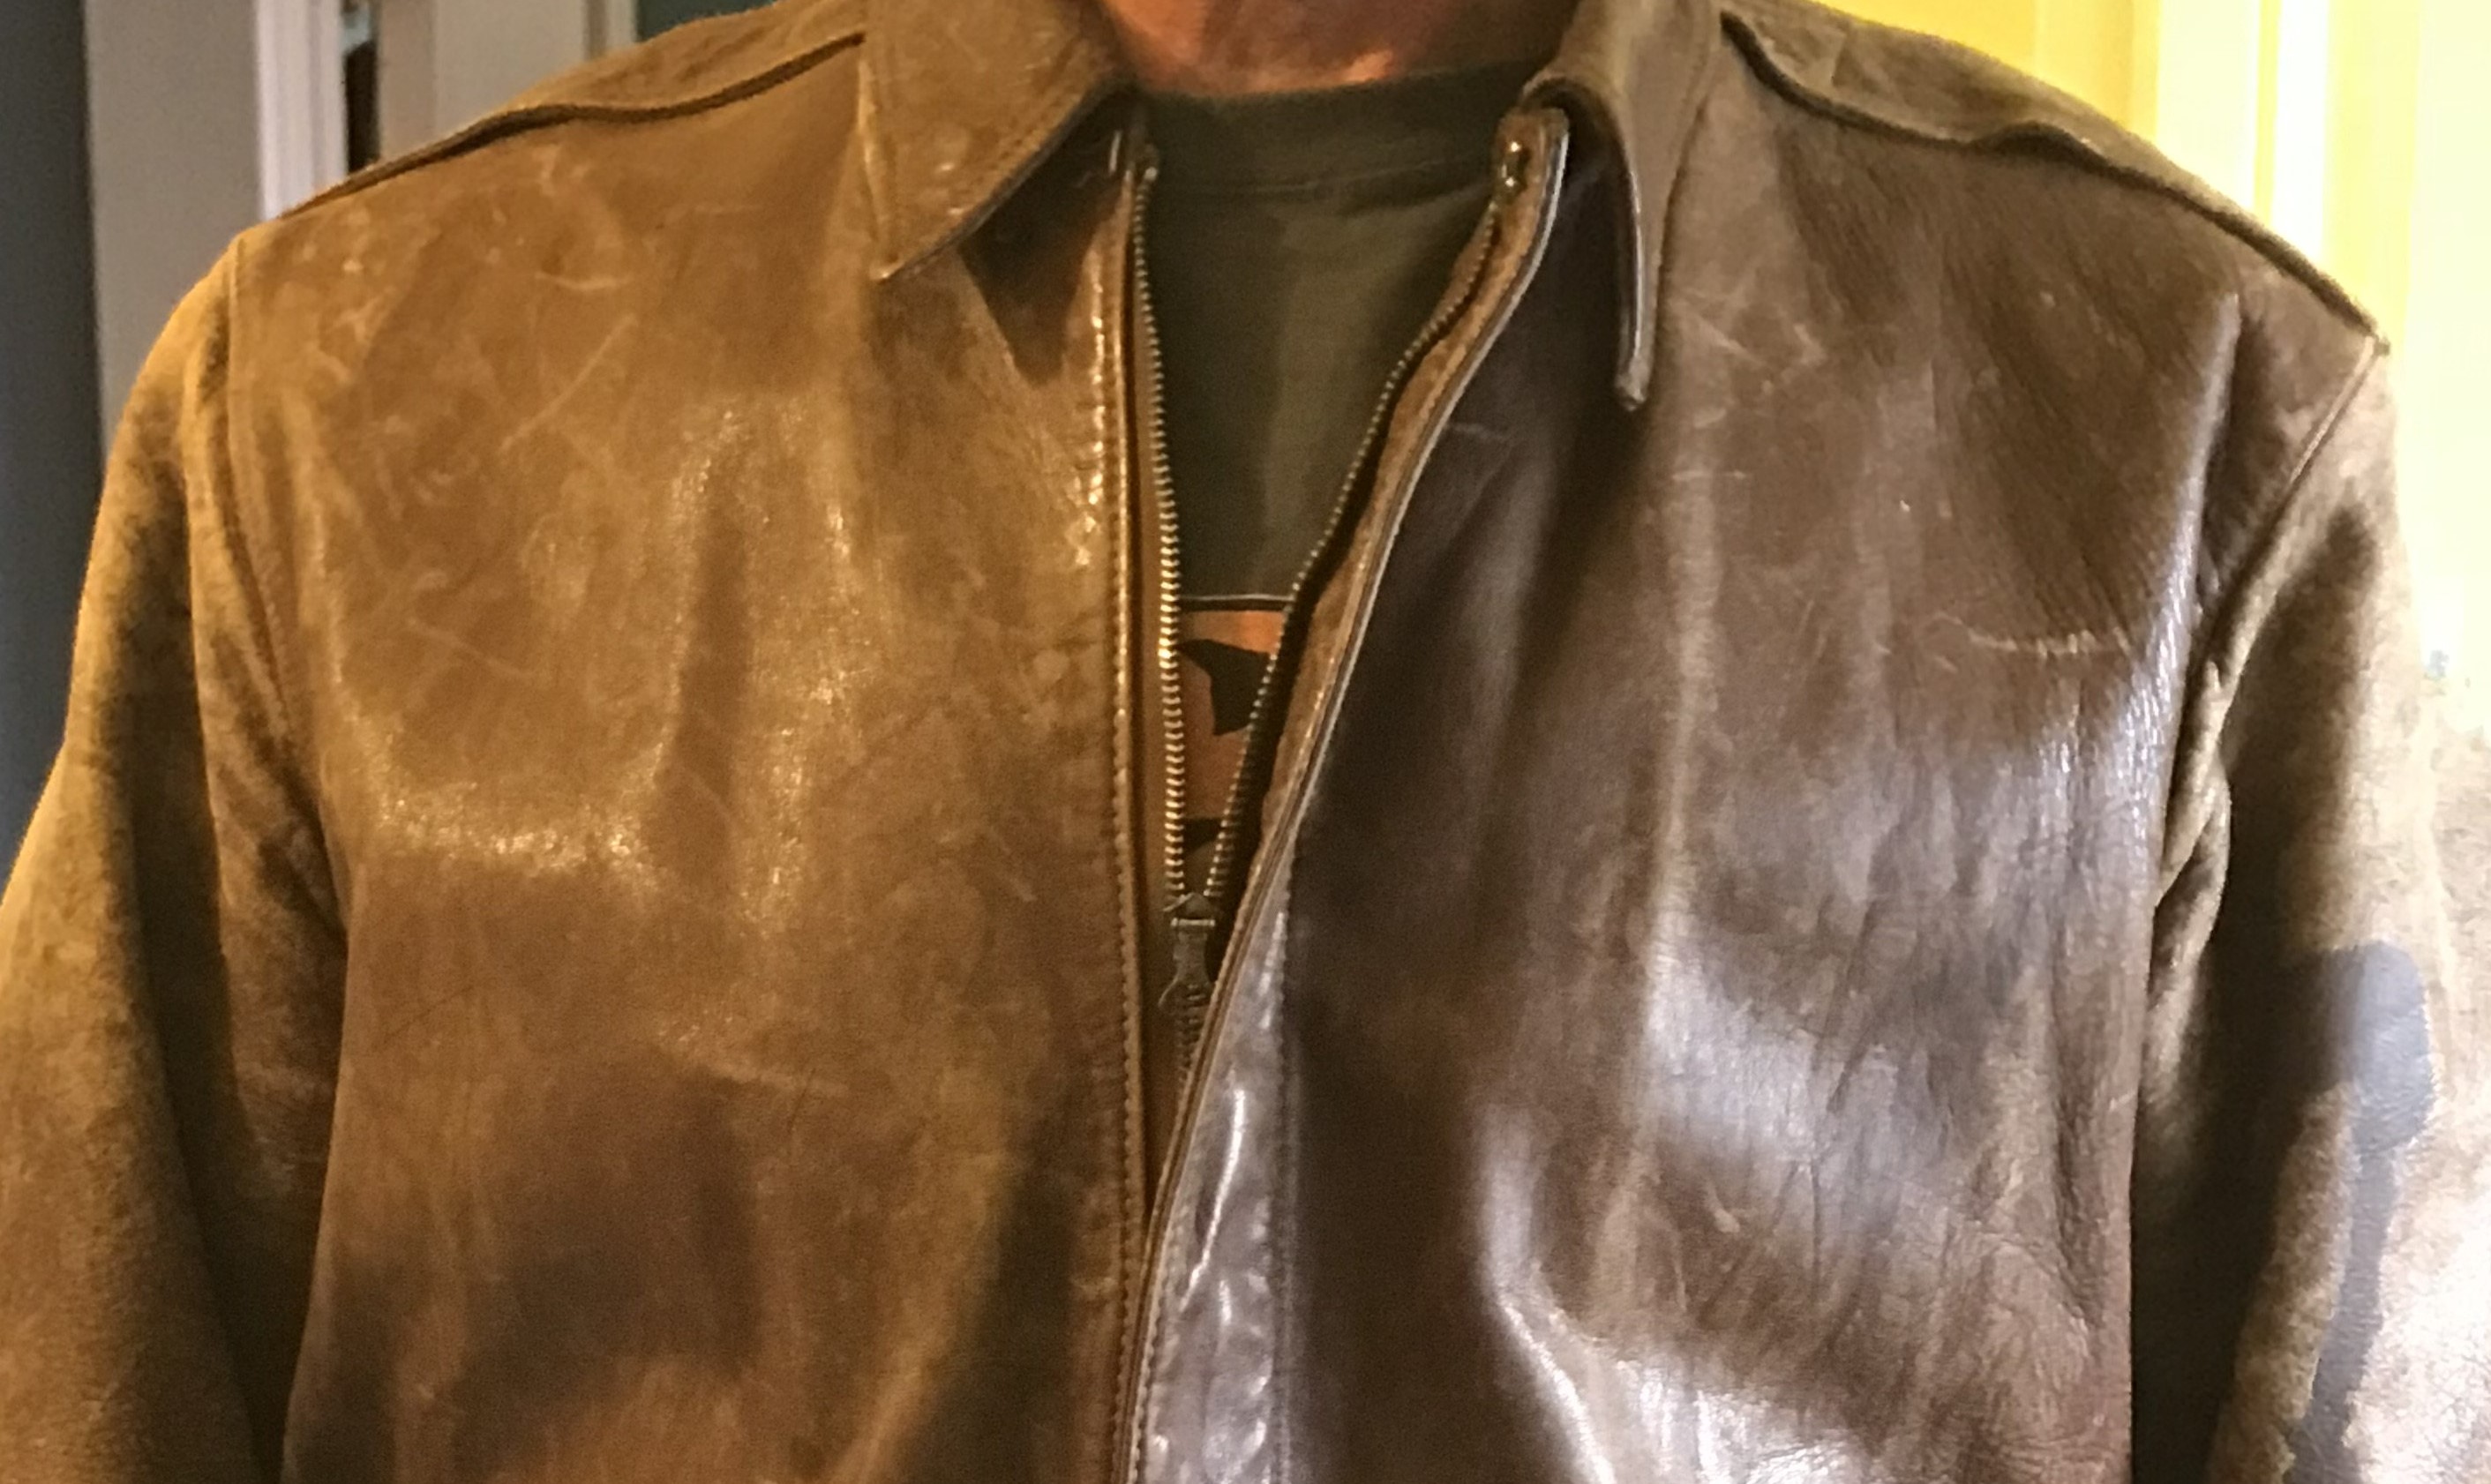 Eastman Dubow | Vintage Leather Jackets Forum